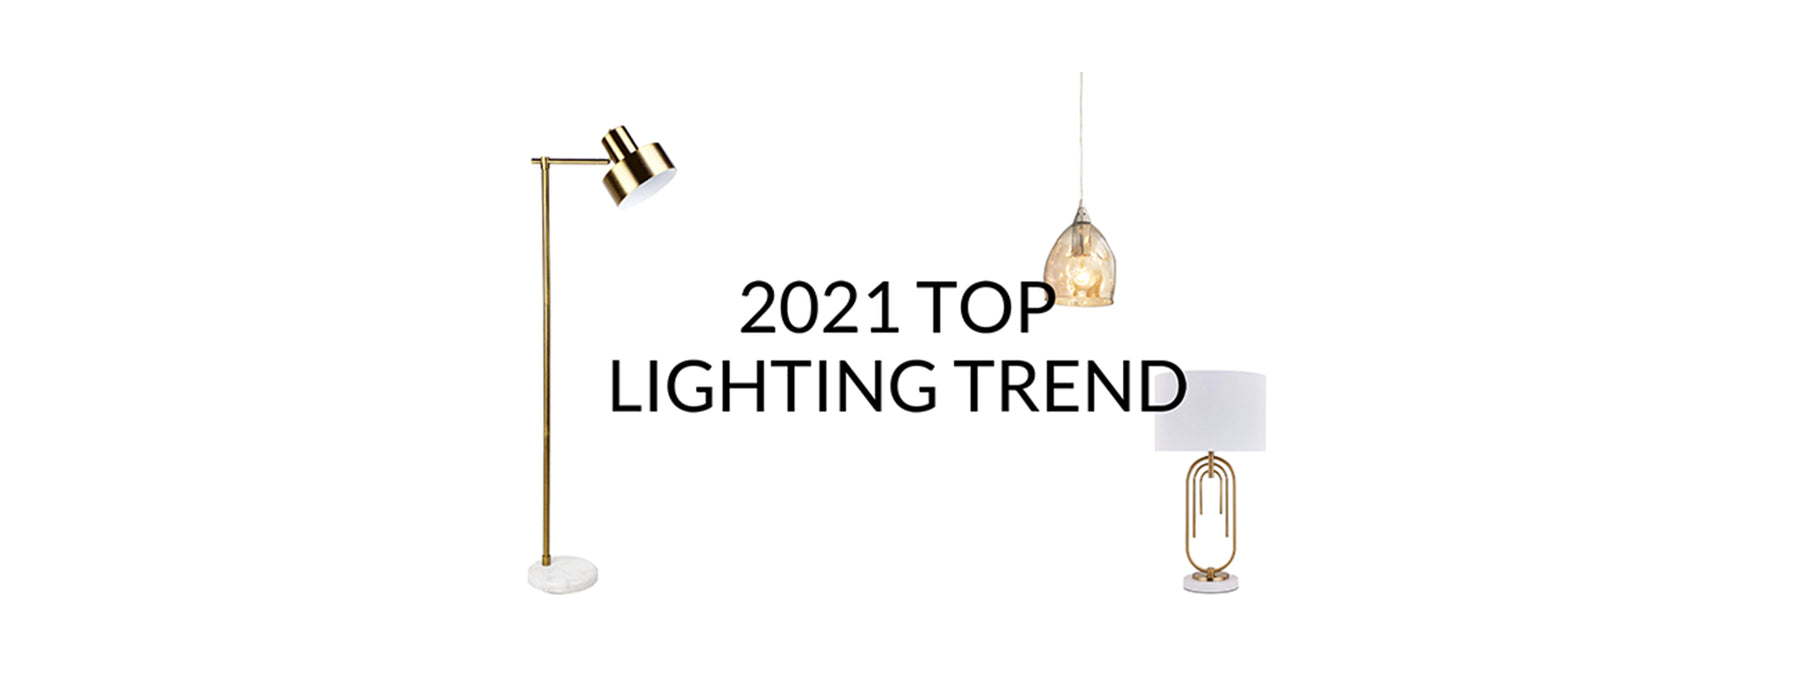 The Top Lighting Trends of 2021 So Far